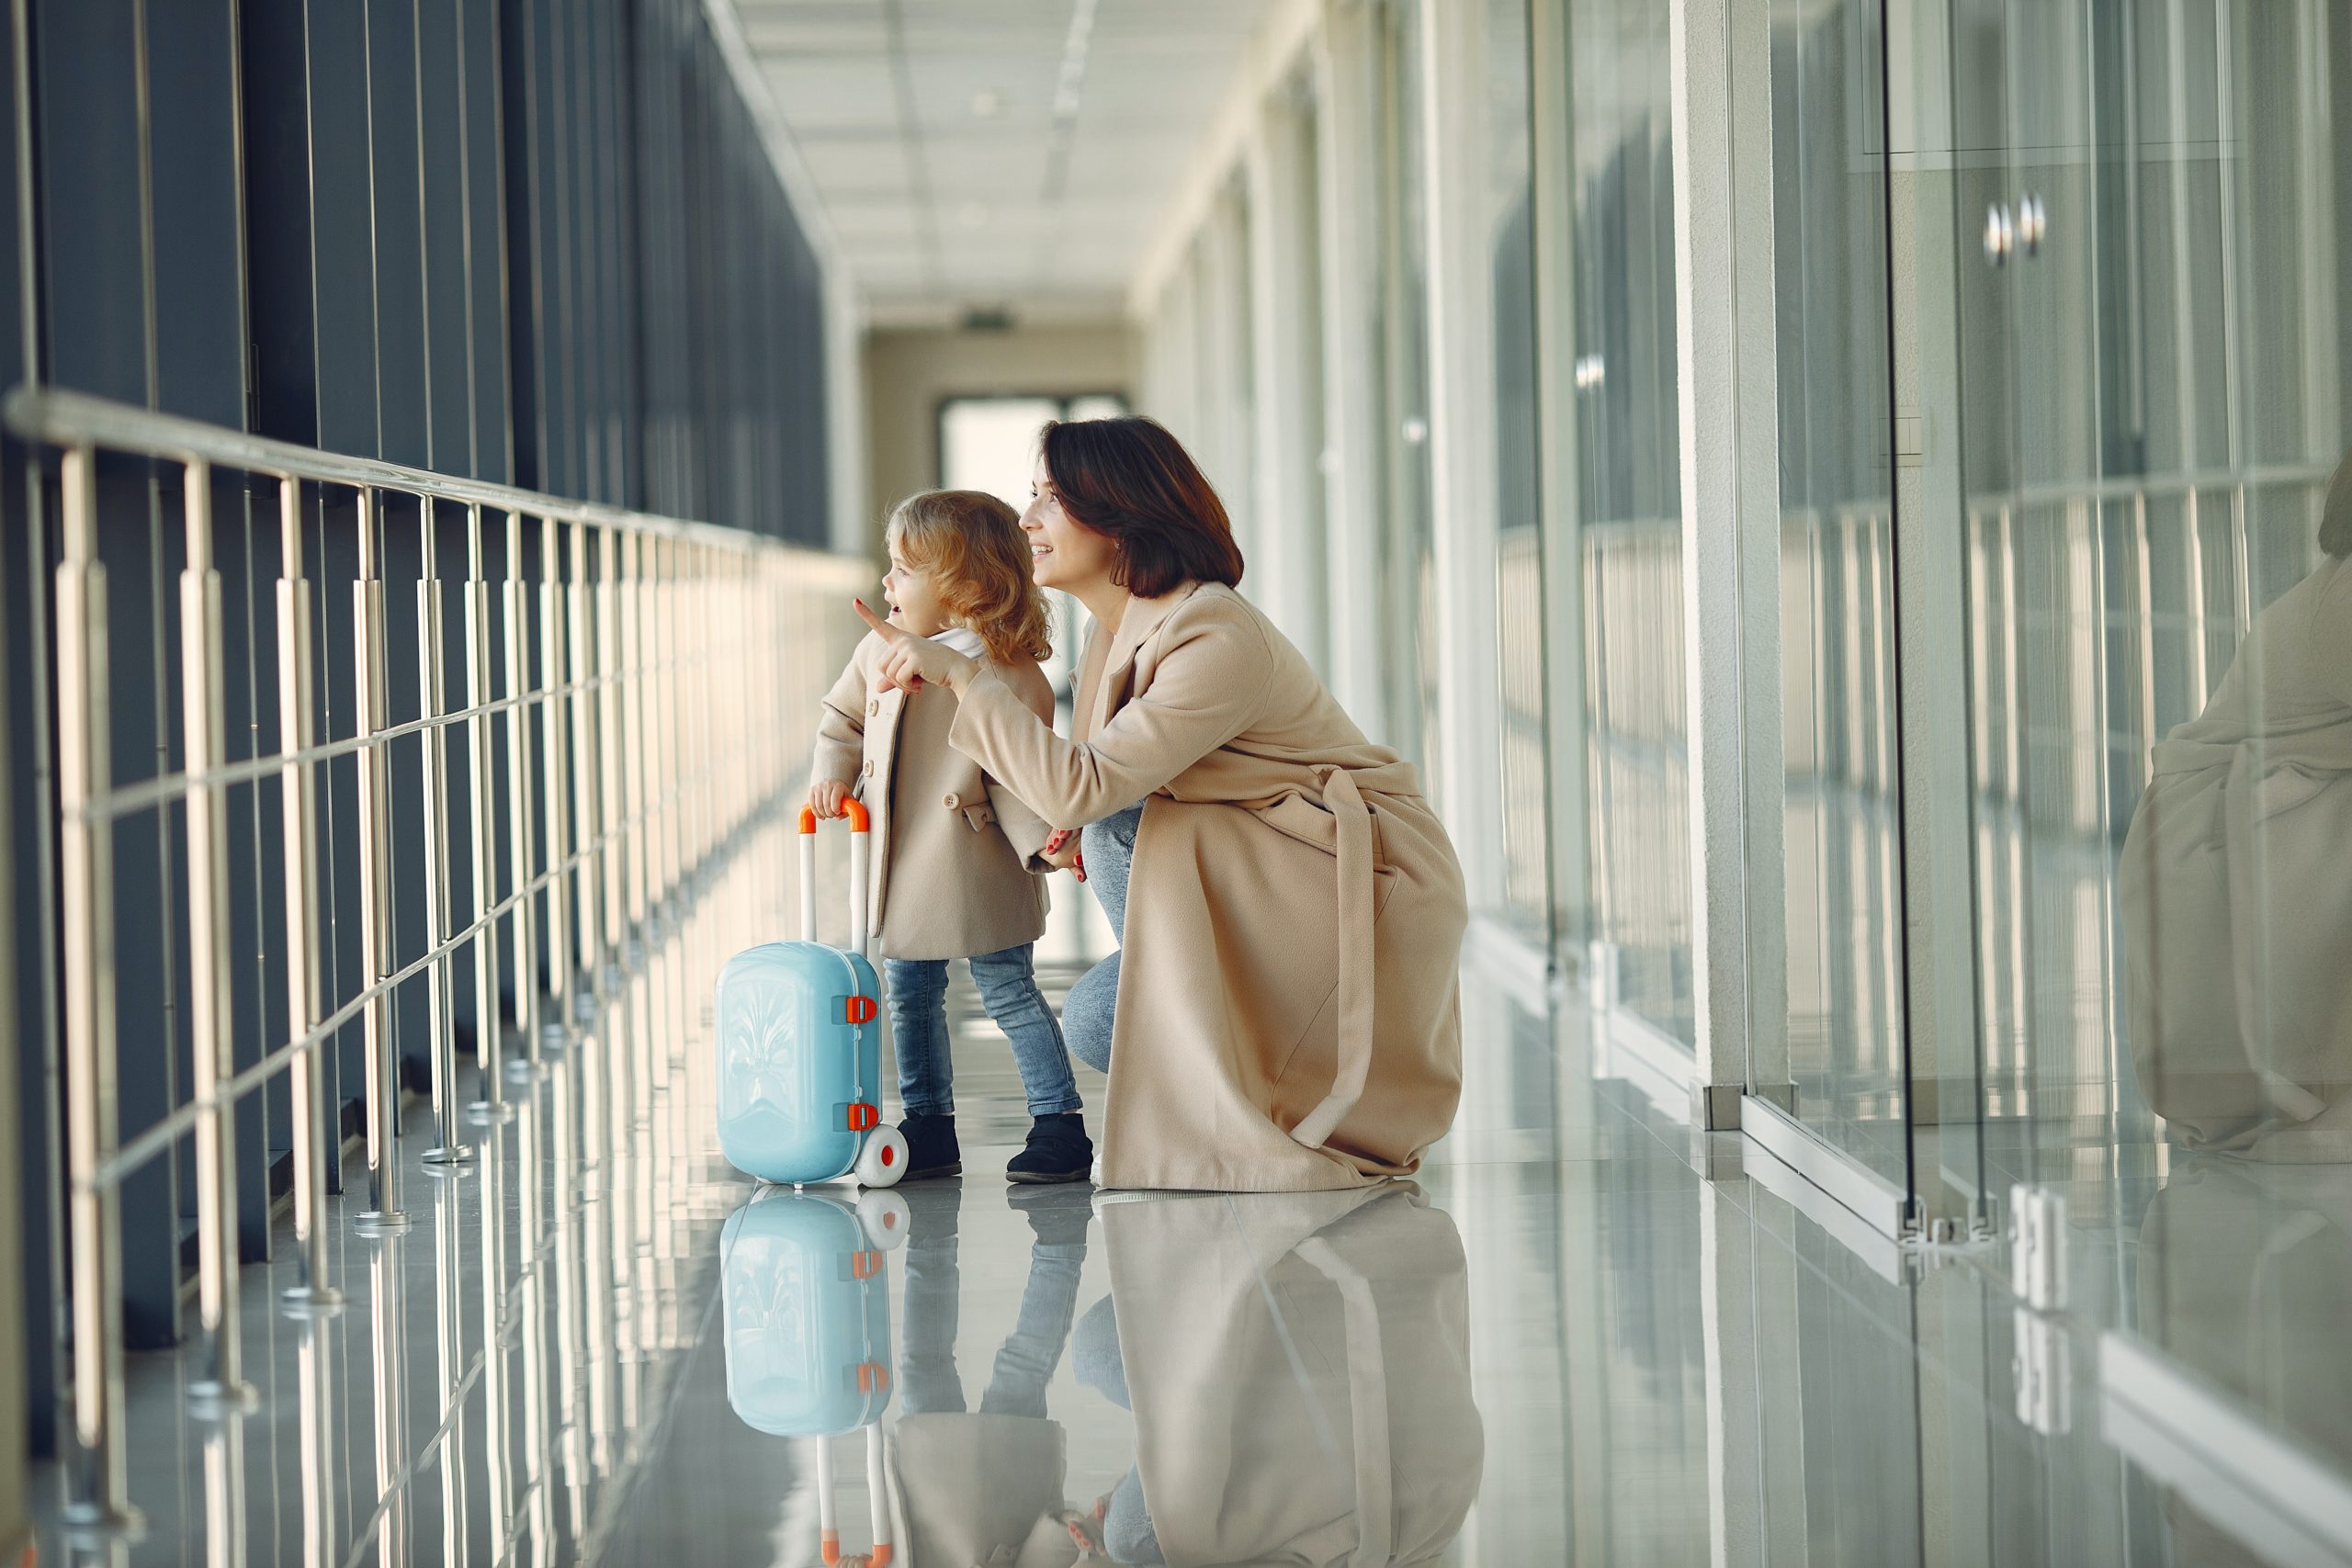 Can I Move Out Of State With My Child If I Have Full Custody?